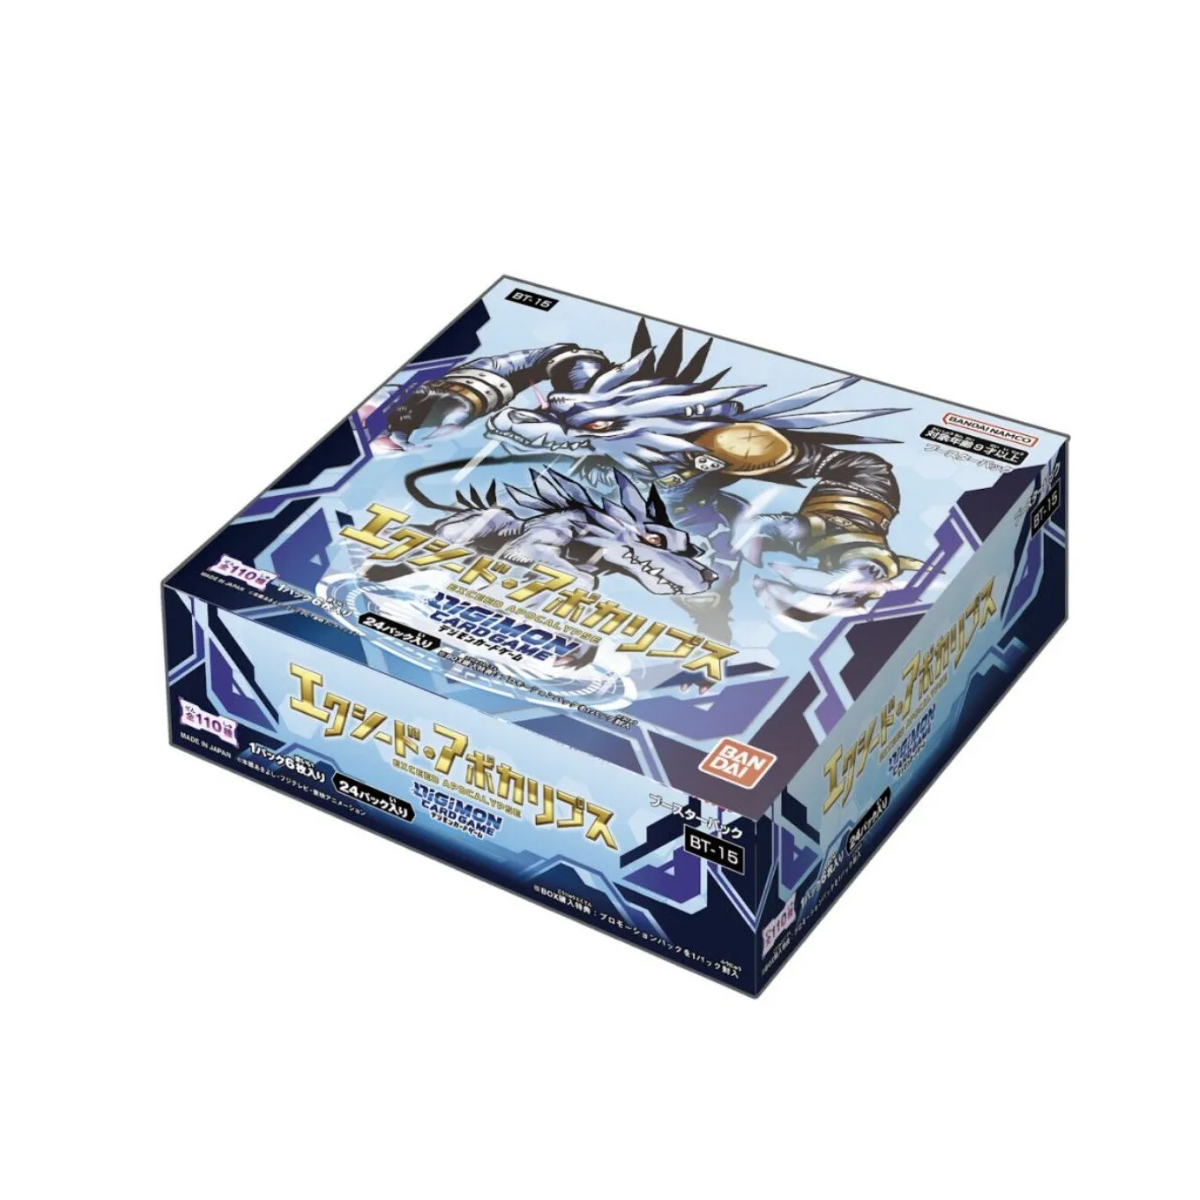 Digimon Card Game "Exceed Apocalypse" Ver.15 Booster [BT-15] (Japanese)-Single Pack (Random)-Bandai-Ace Cards & Collectibles